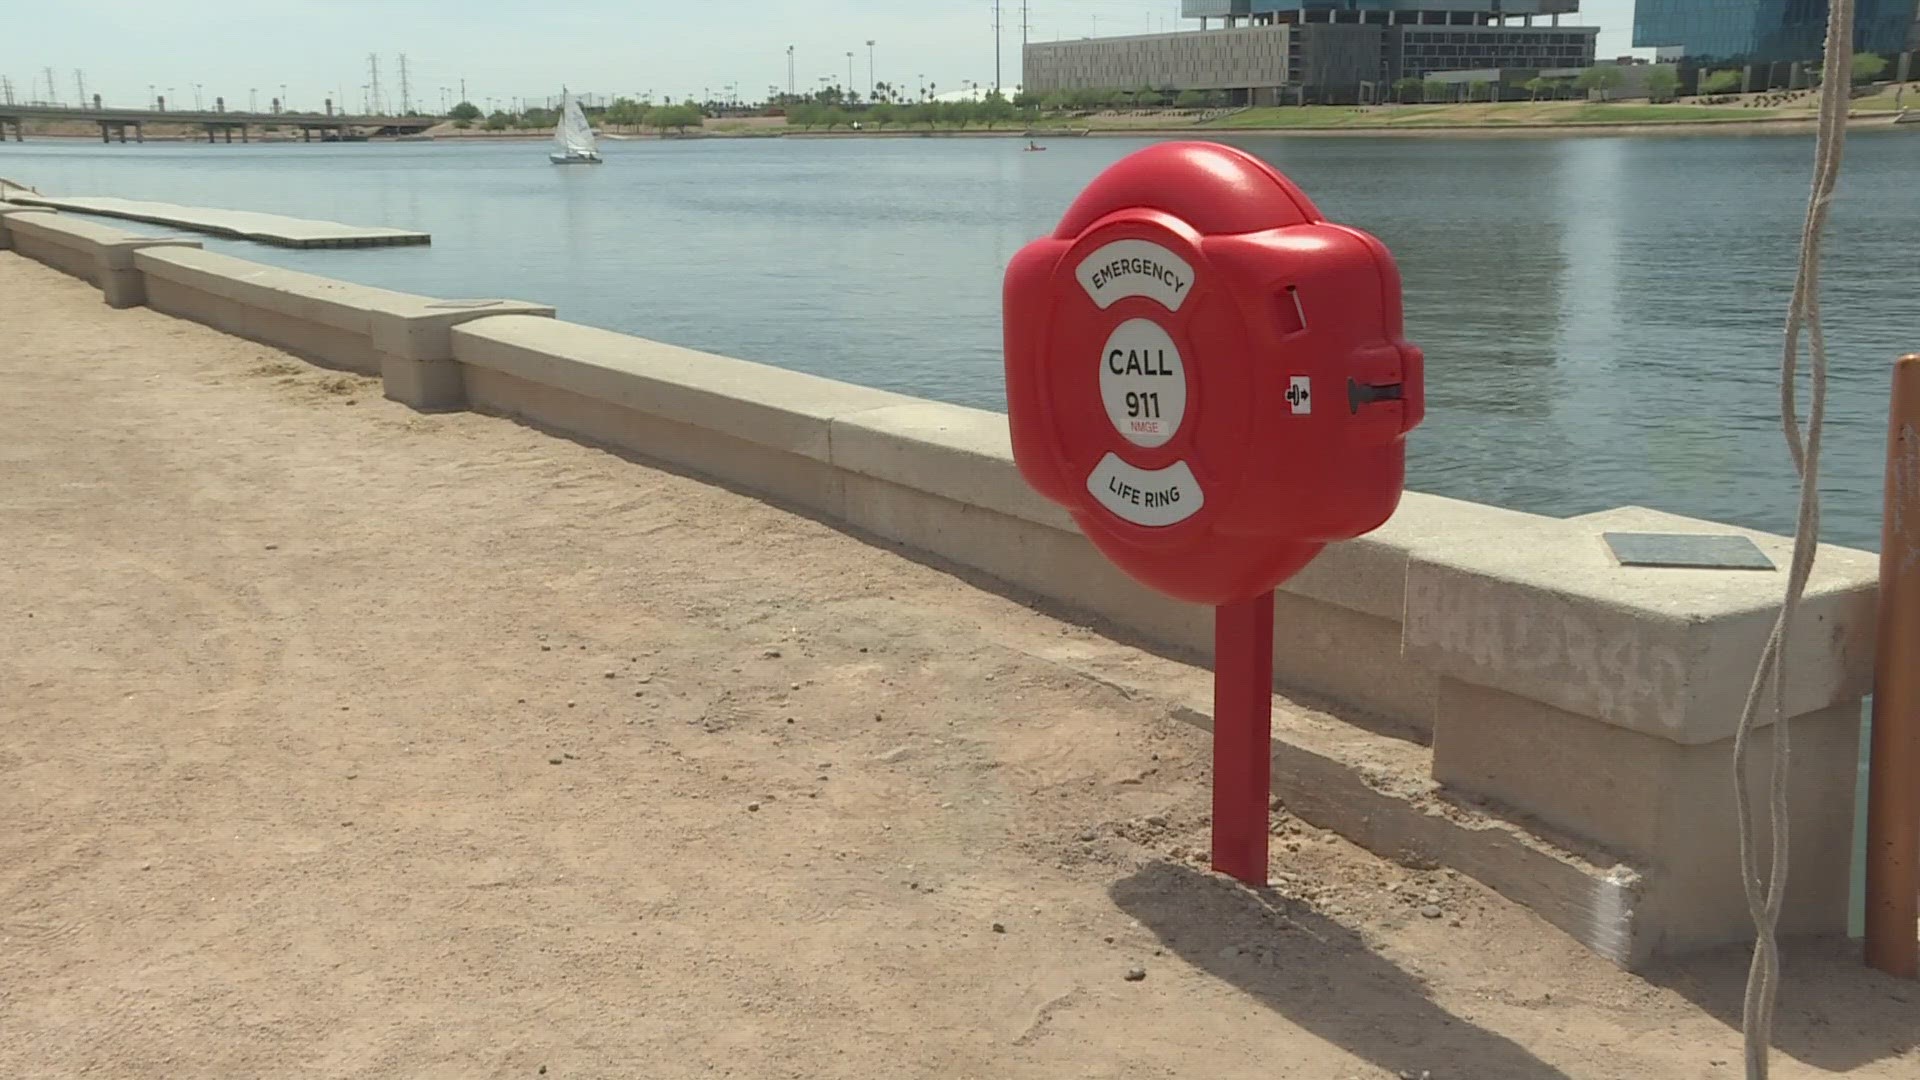 The City of Tempe is taking action to prevent future tragedies in city lakes after a wrongful death lawsuit accused officers of watching a man drown.